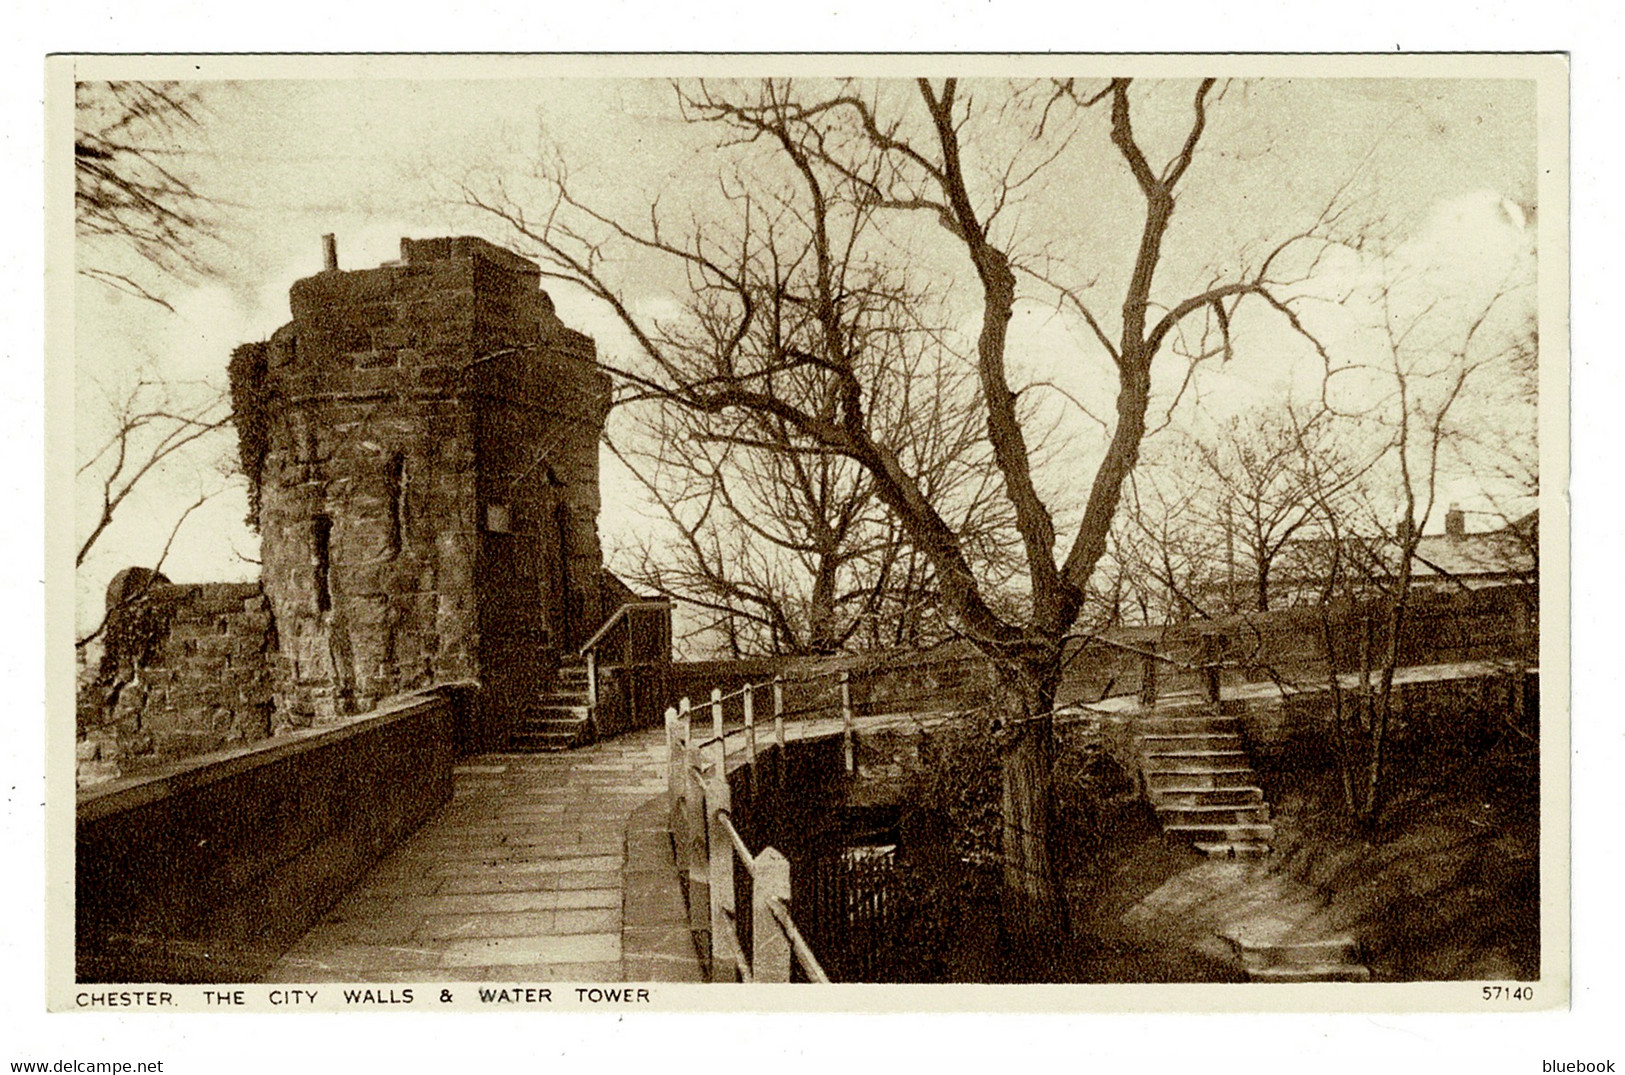 Ref 1456 - 2 X Postcards - City Walls & Water Tower - Castle & River - Chester Cheshire - Chester